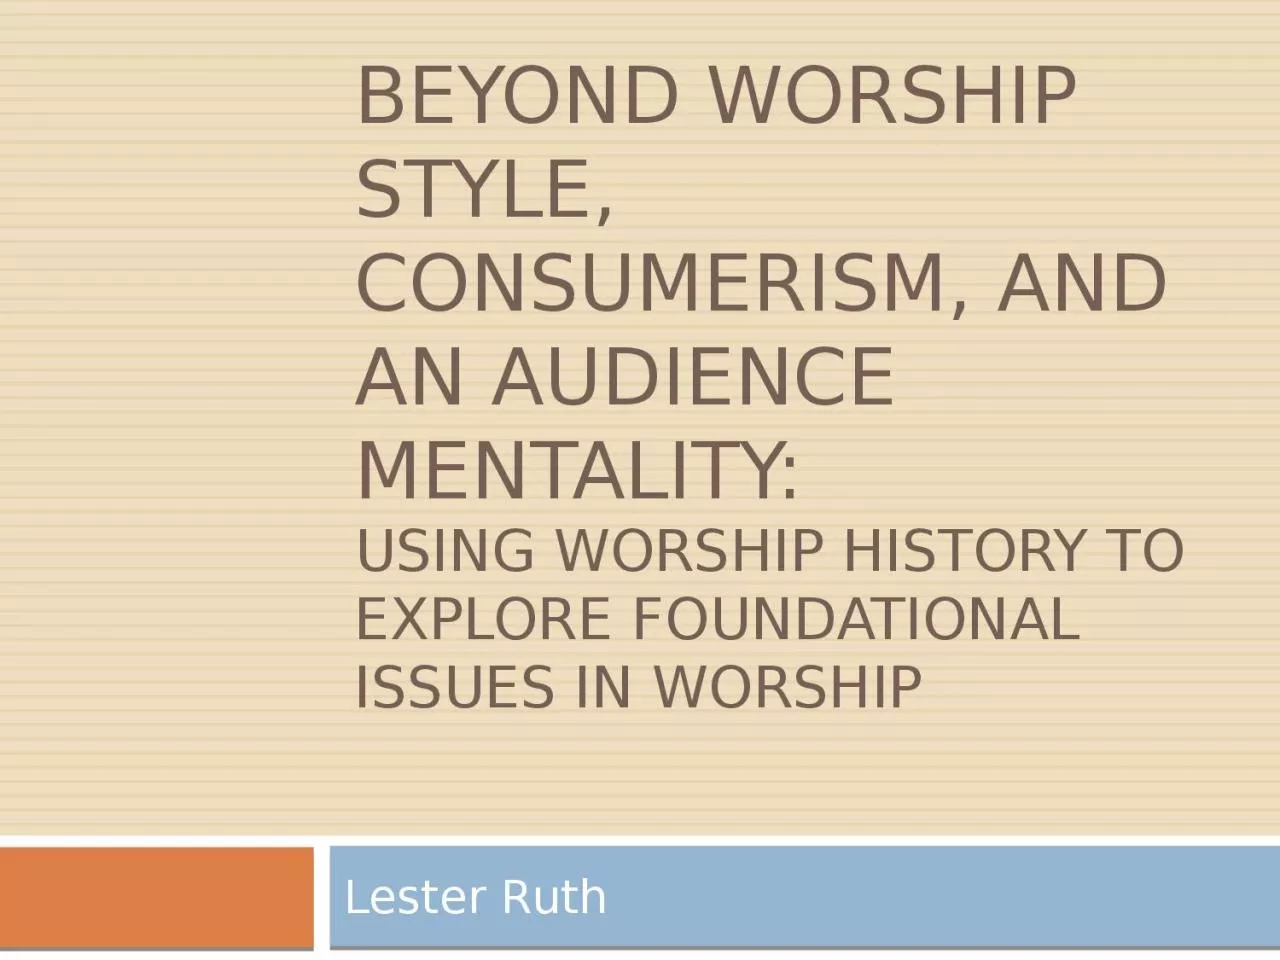 Beyond Worship Style, Consumerism, and an Audience